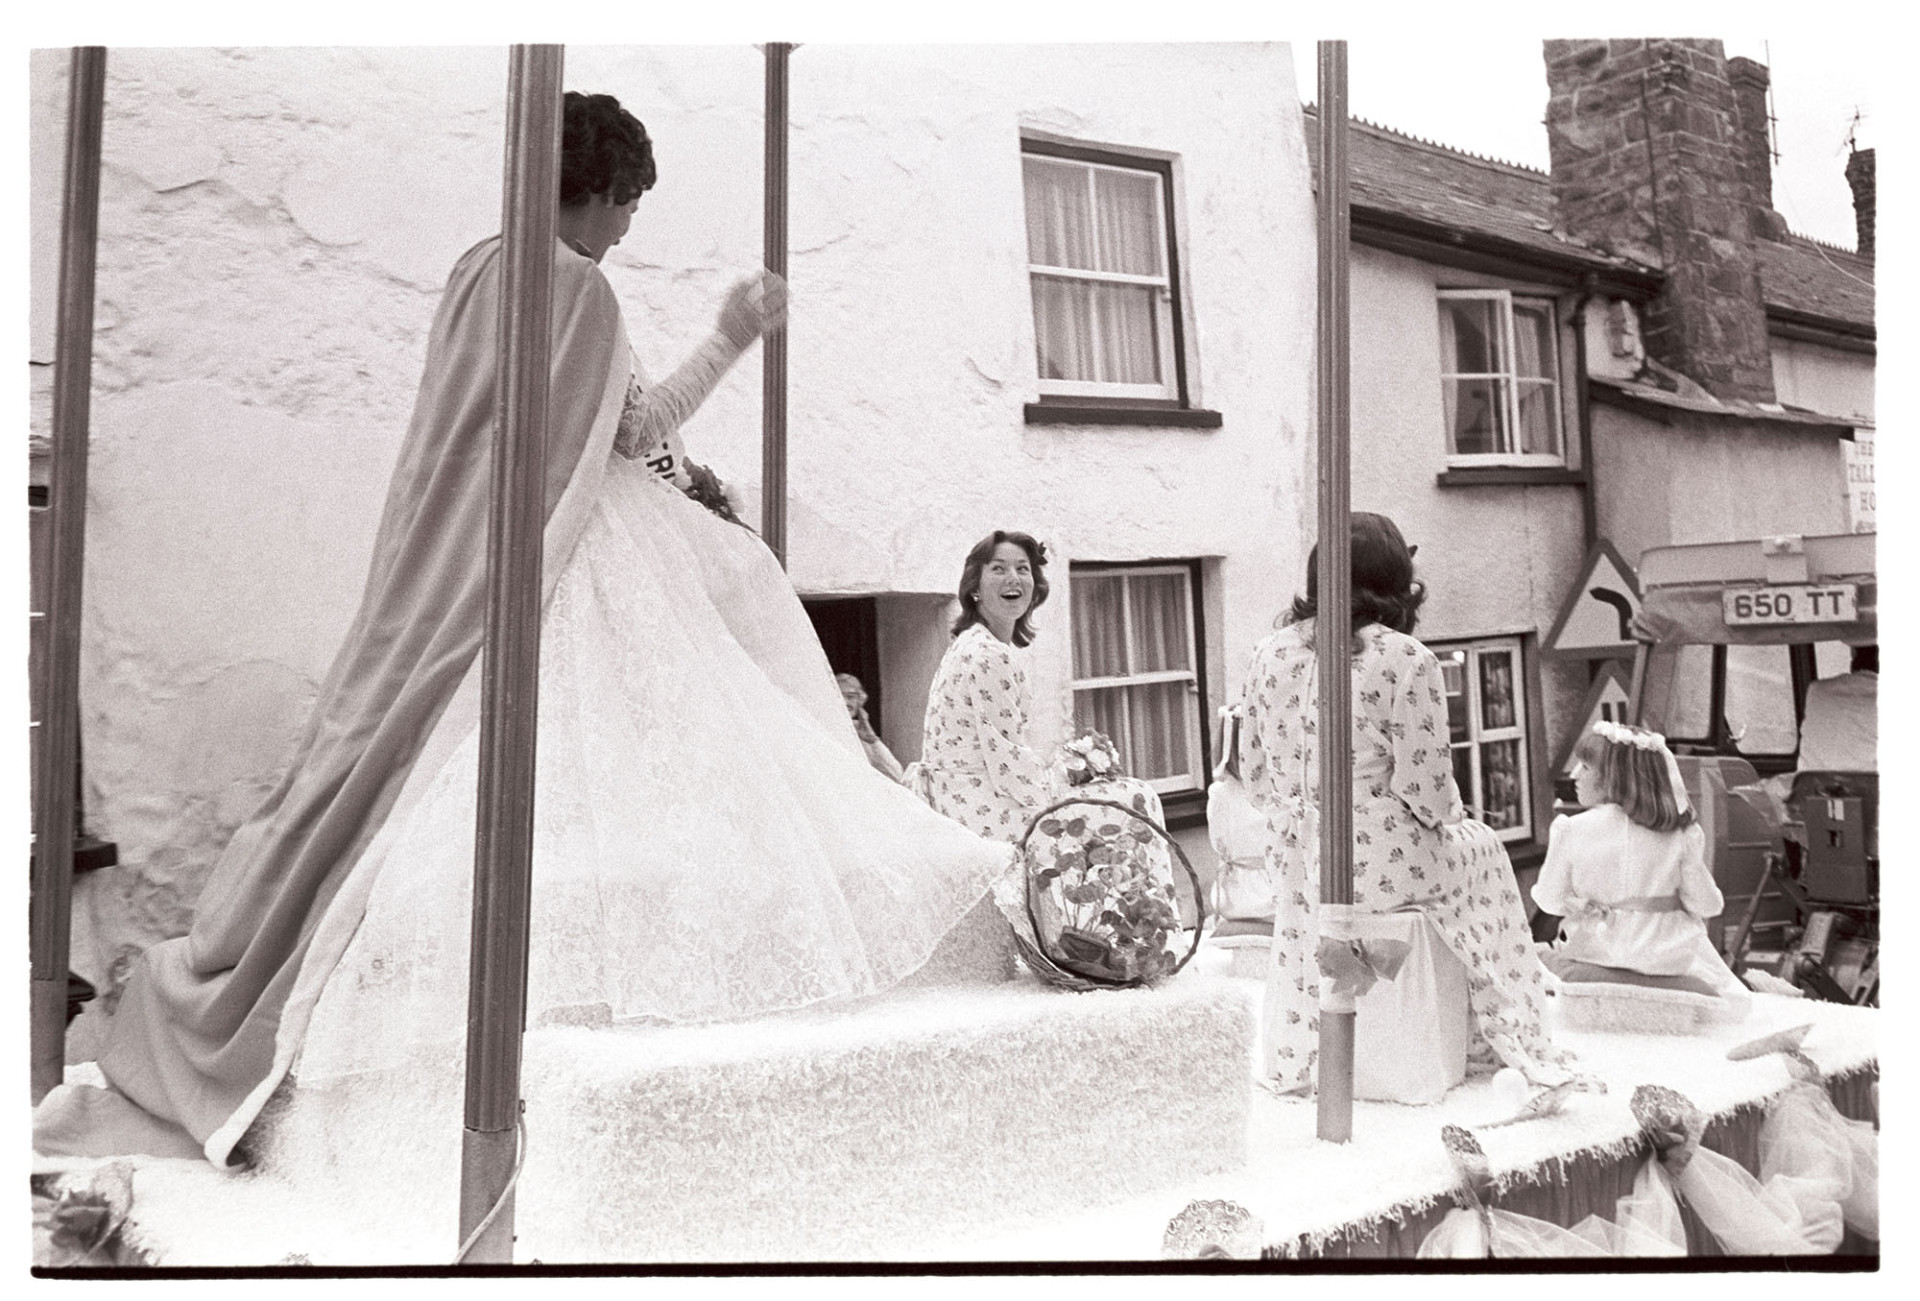 Carnival Queen and attendants on float during parade.
[Sue Reynolds, Carnival Queen, with her attendants on a carnival float being pulled by a tractor at Hatherleigh Carnival.]